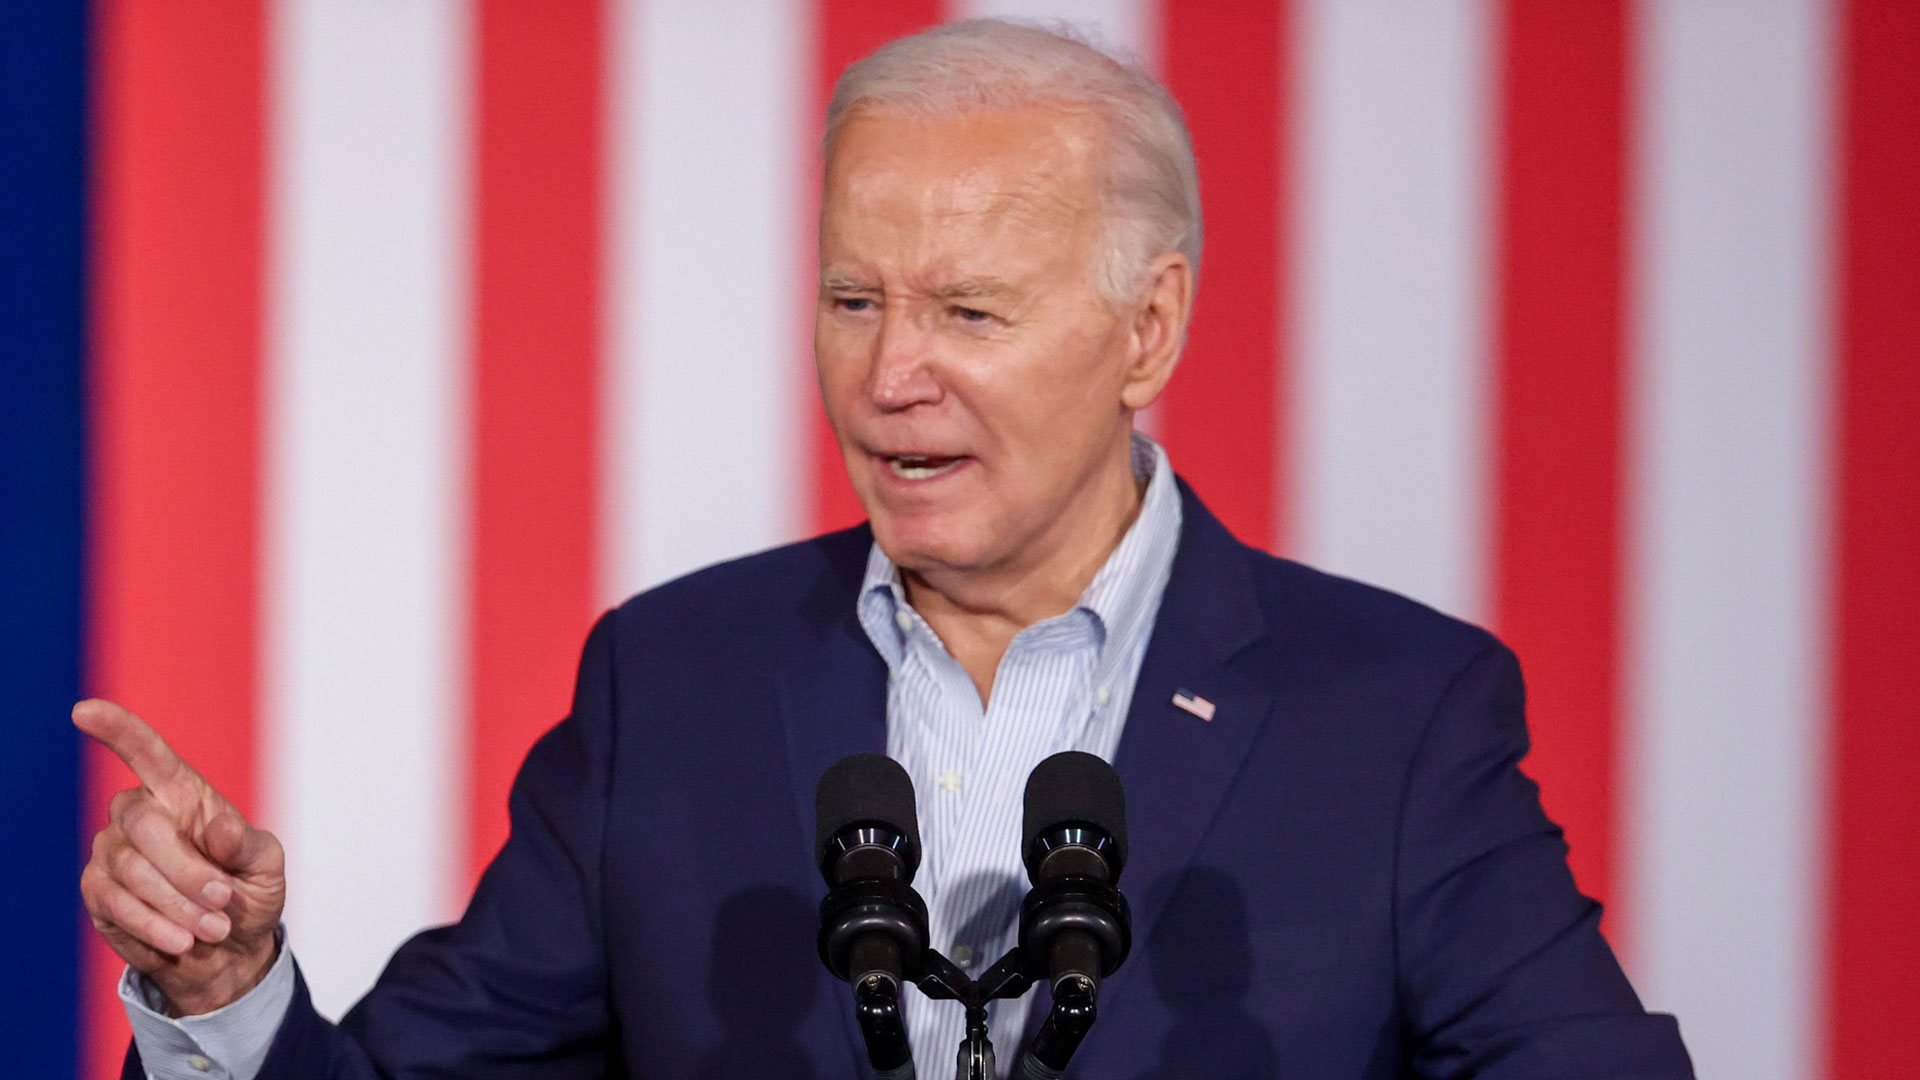 ‘Greed never fails to rear its ugly self,’ drivers fume over Biden’s new plan to push out gas cars for electric vehicles [Video]